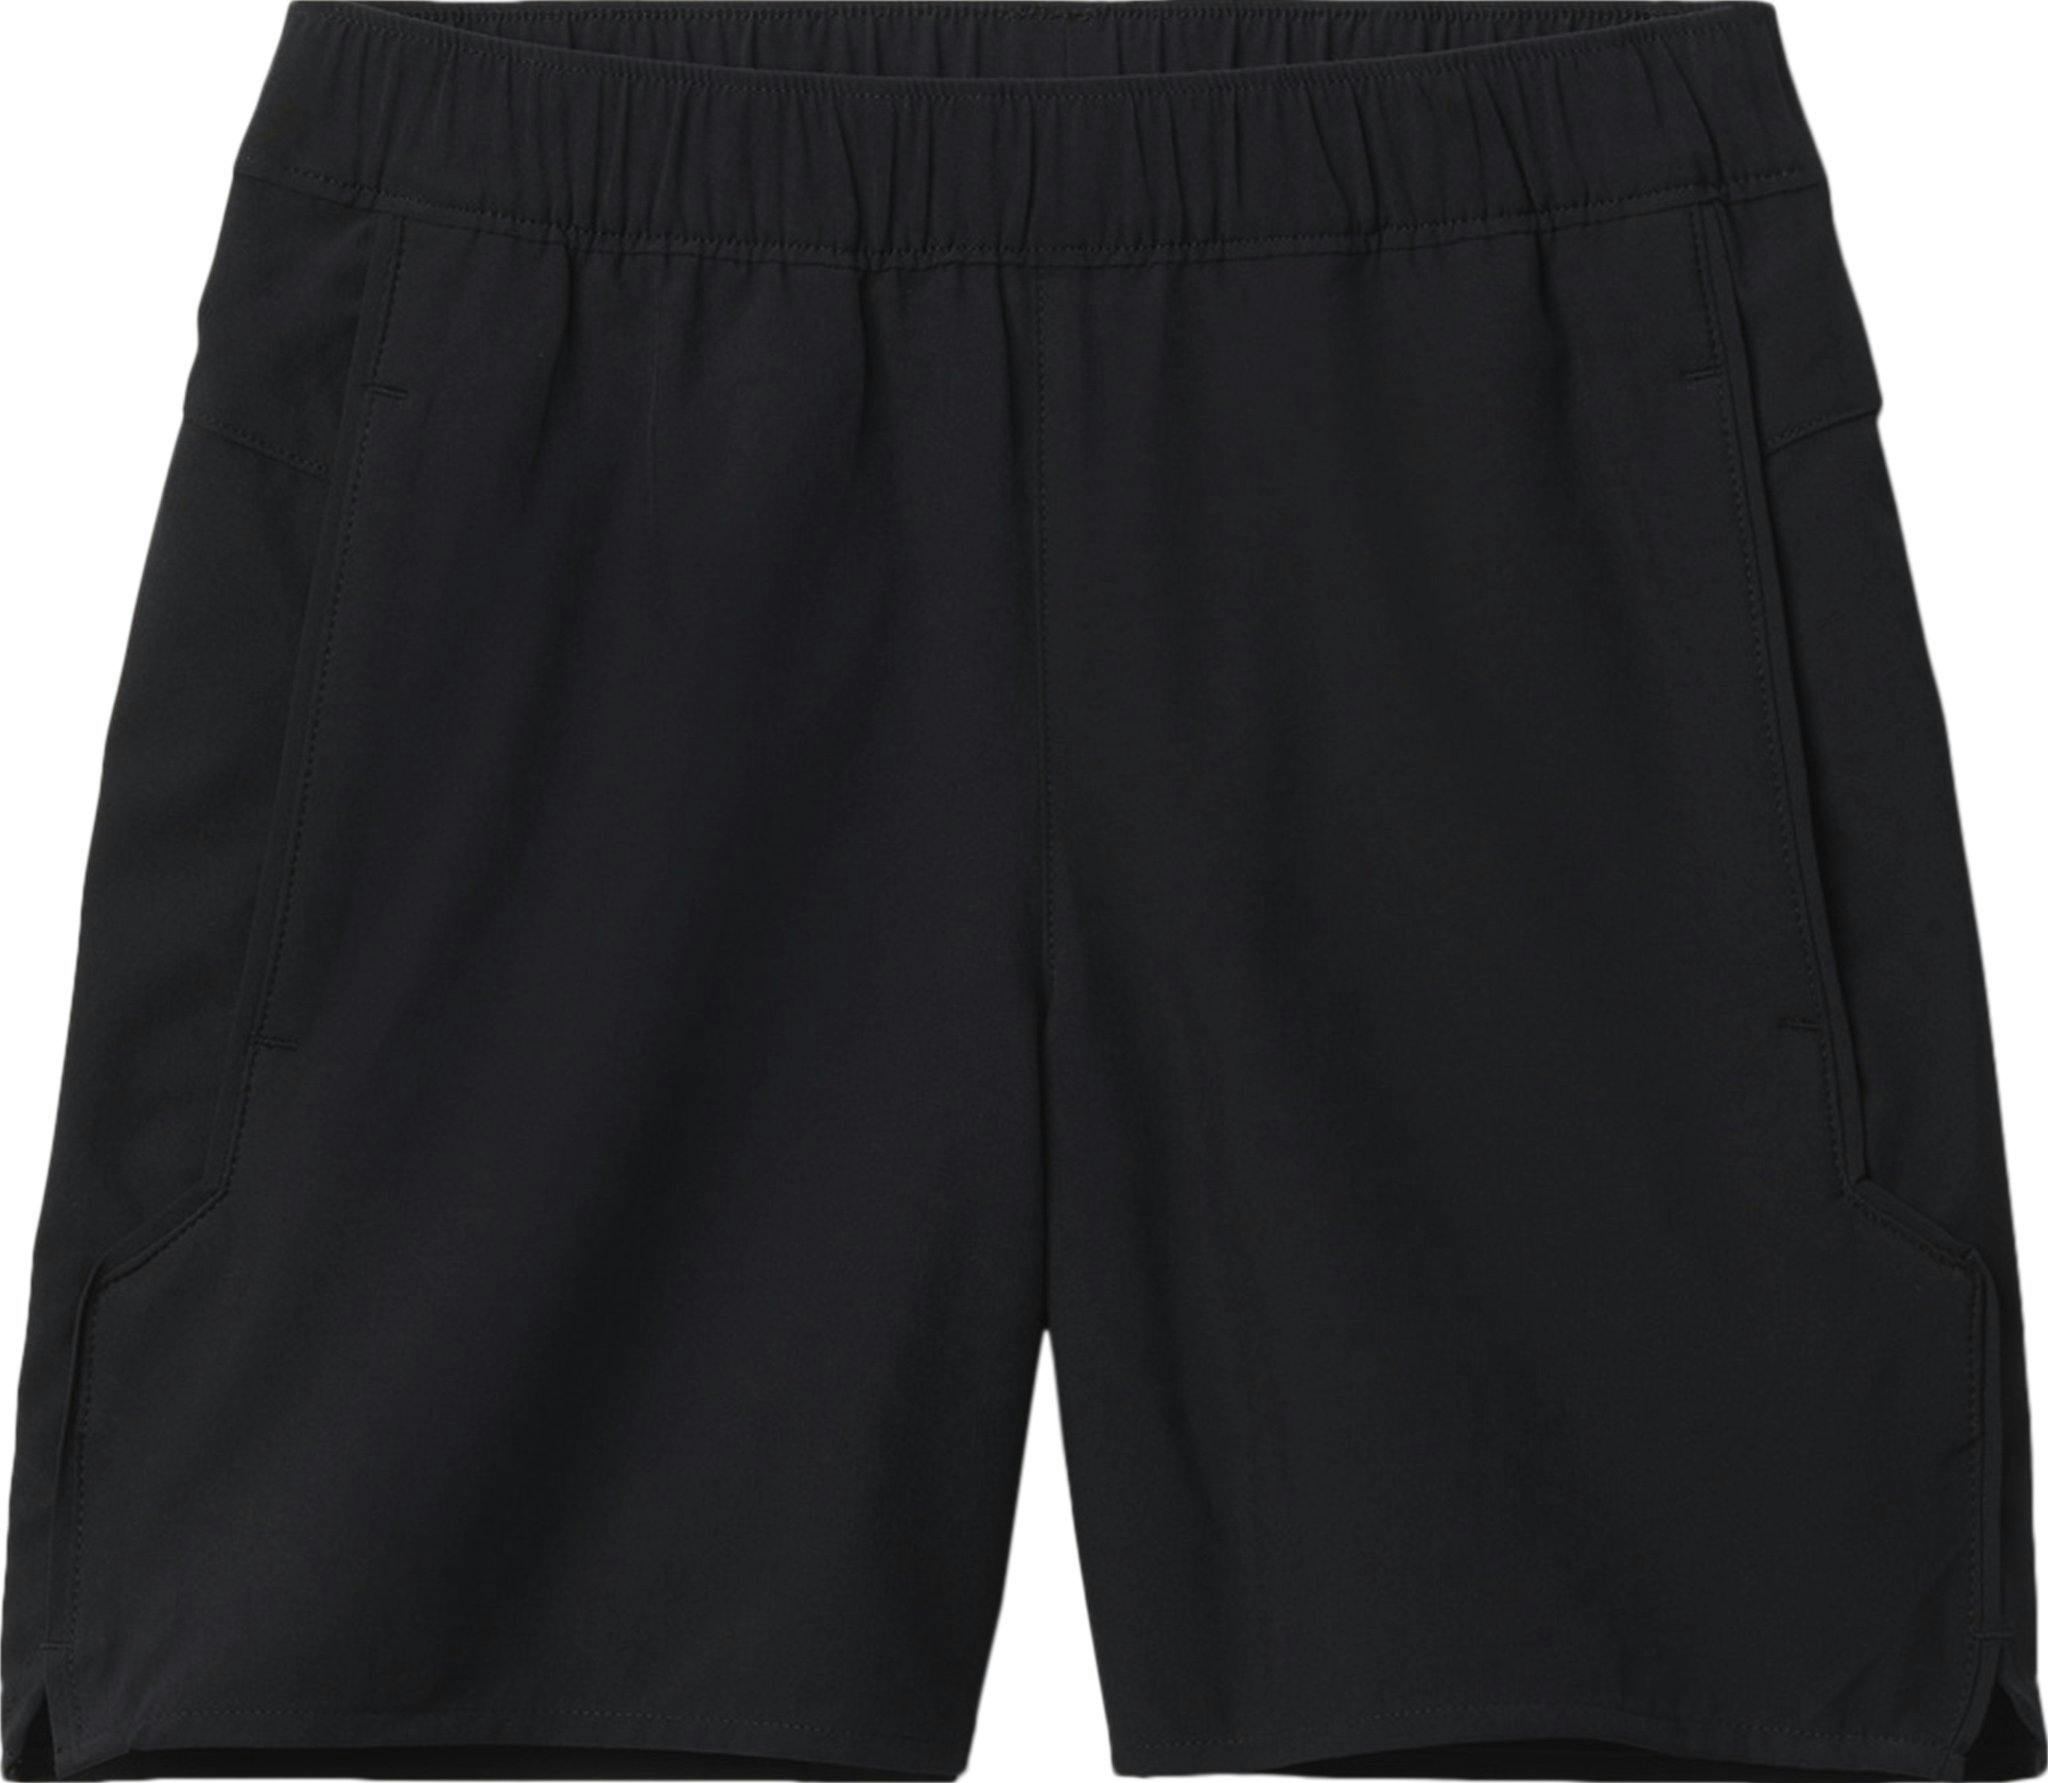 Product image for Columbia Hike Short - Boys